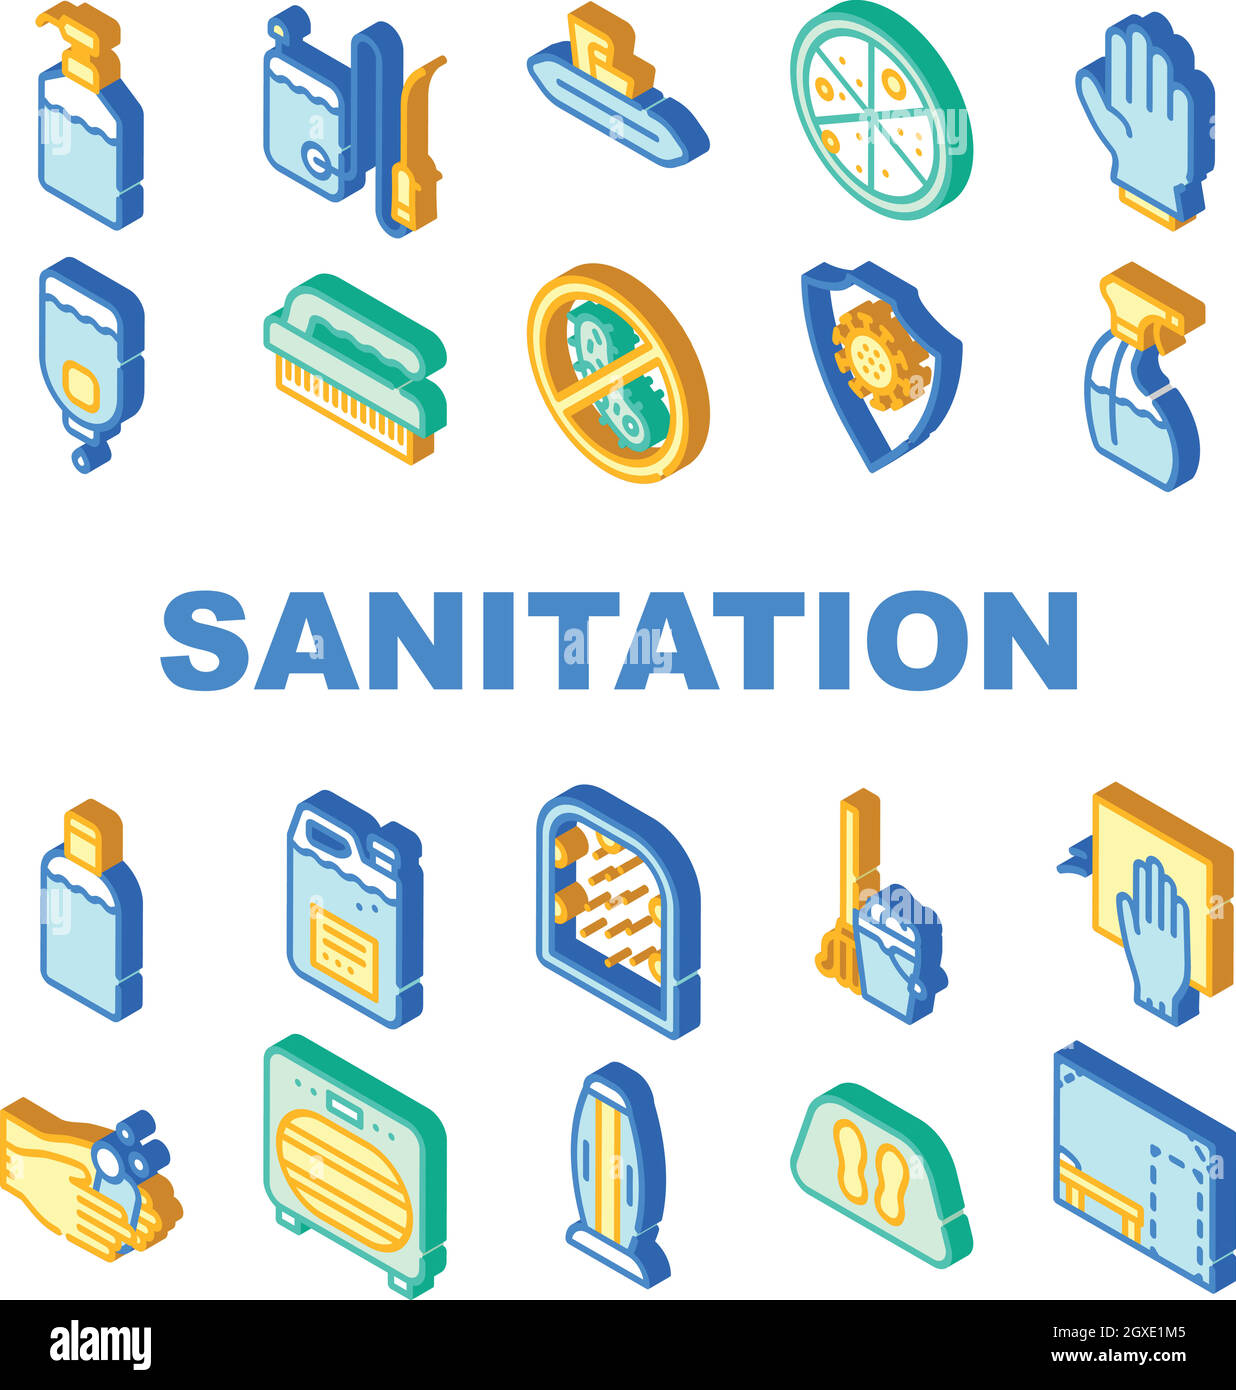 Sanitation Accessories Collection Icons Set Vector Illustrations Stock Vector